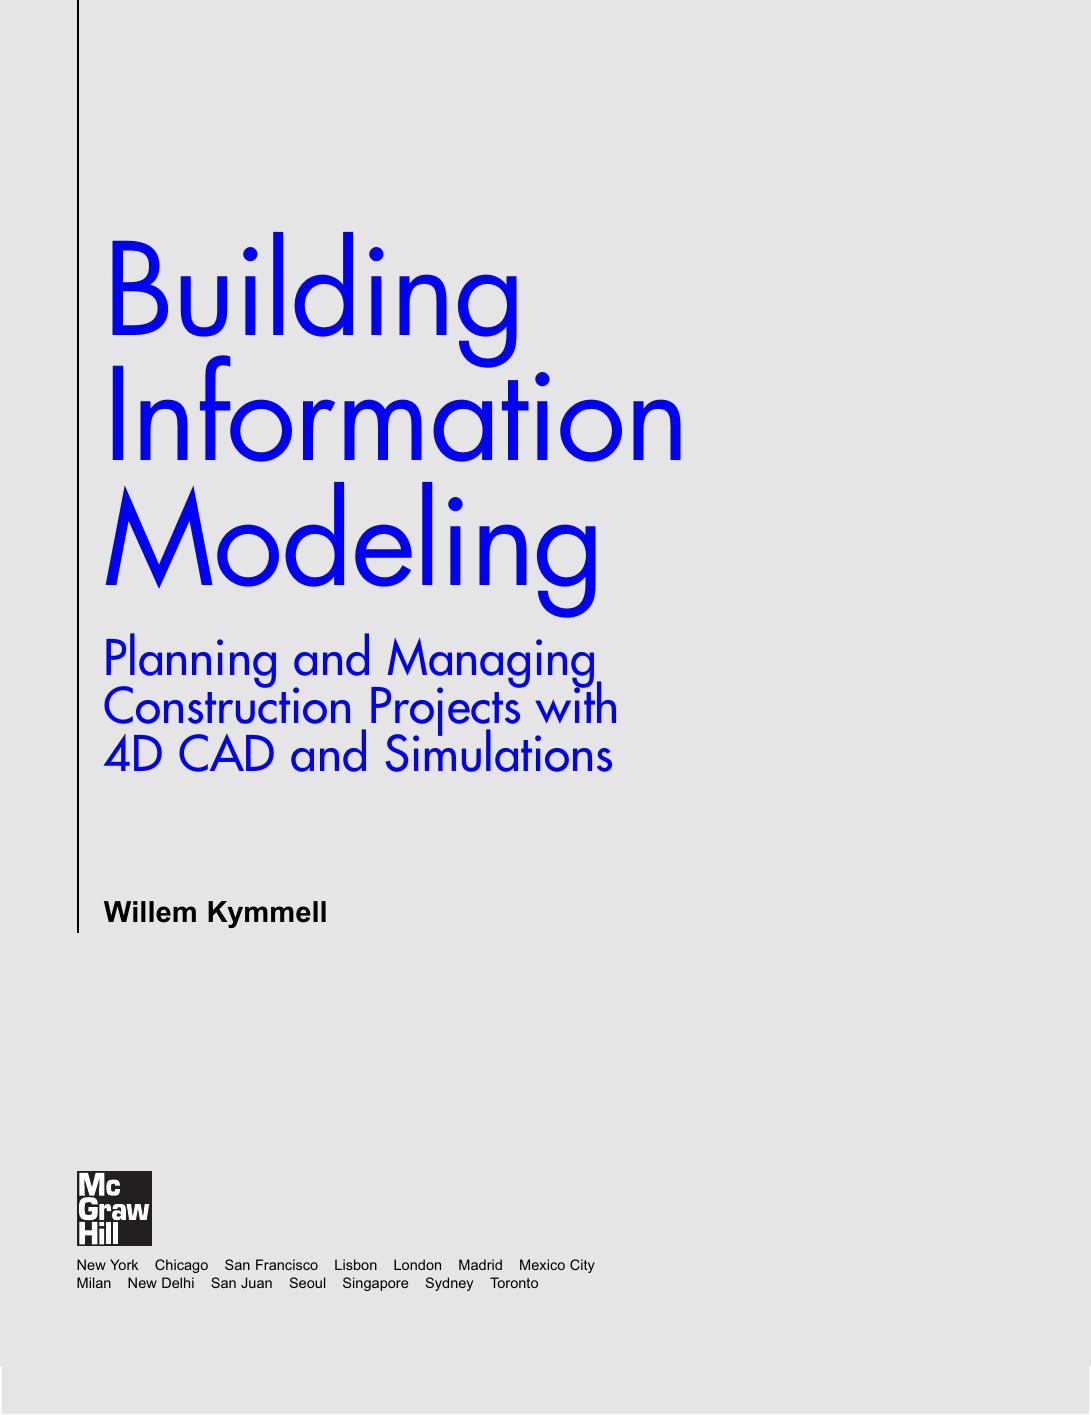 Building Information Modeling Planning and Managing Construction Projects with 4D CAD and Simulations Set 2 2008